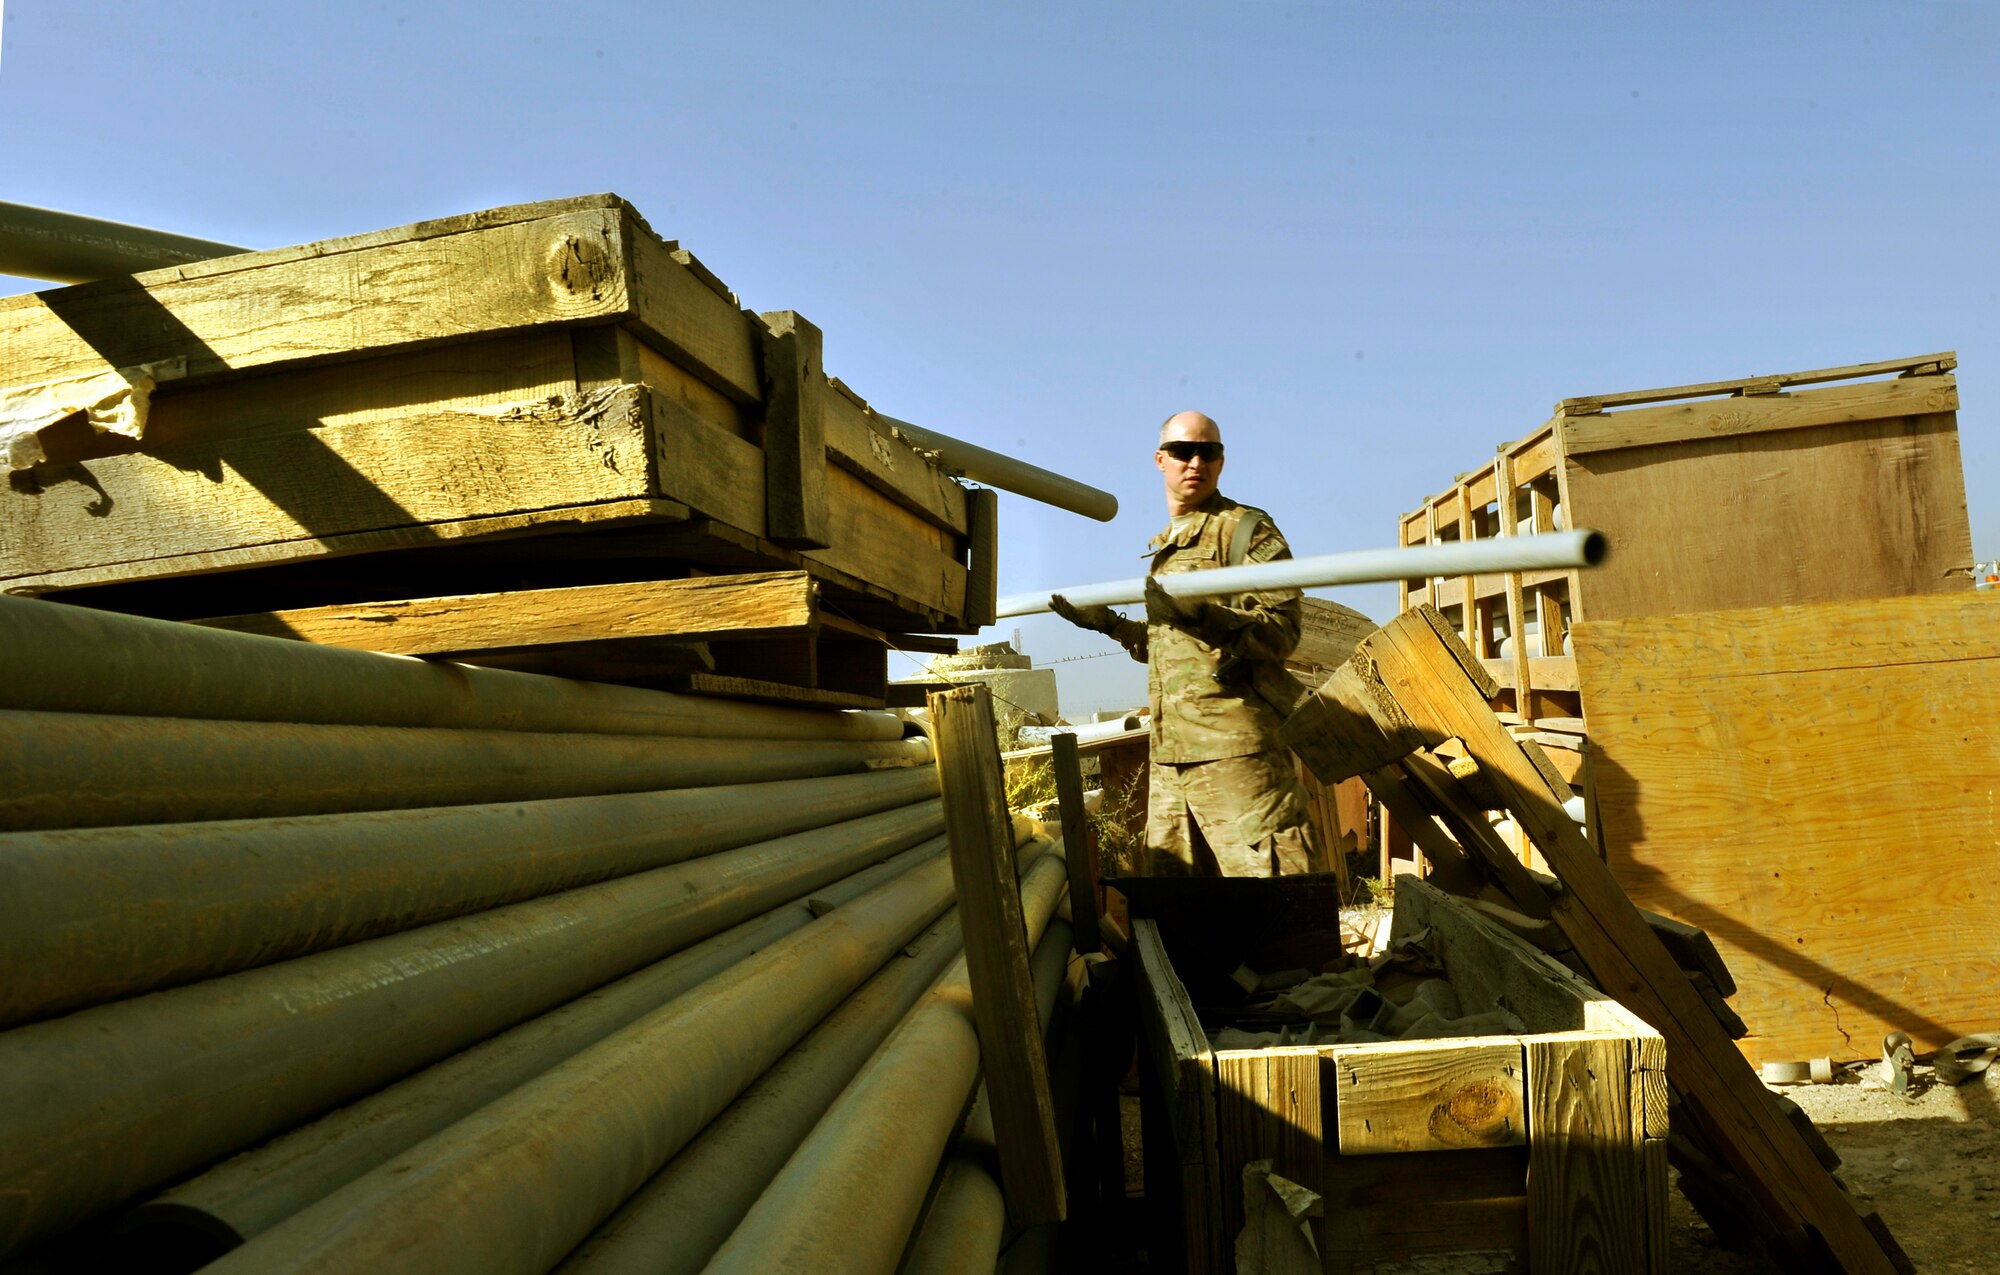 Master Sgt. Douglas Threatt, 455th Expeditionary Communications Squadron Cyber Maintenance Section Chief, picks up equipment and conduit from the storage yard on Bagram Airfield, Afghanistan. The equipment will be used to build a communications equipment room and install fiber optic cables. Threatt is deployed from Ramstein Air Base, Germany. (U.S. Air Force photo/ Staff Sgt. Stephenie Wade)